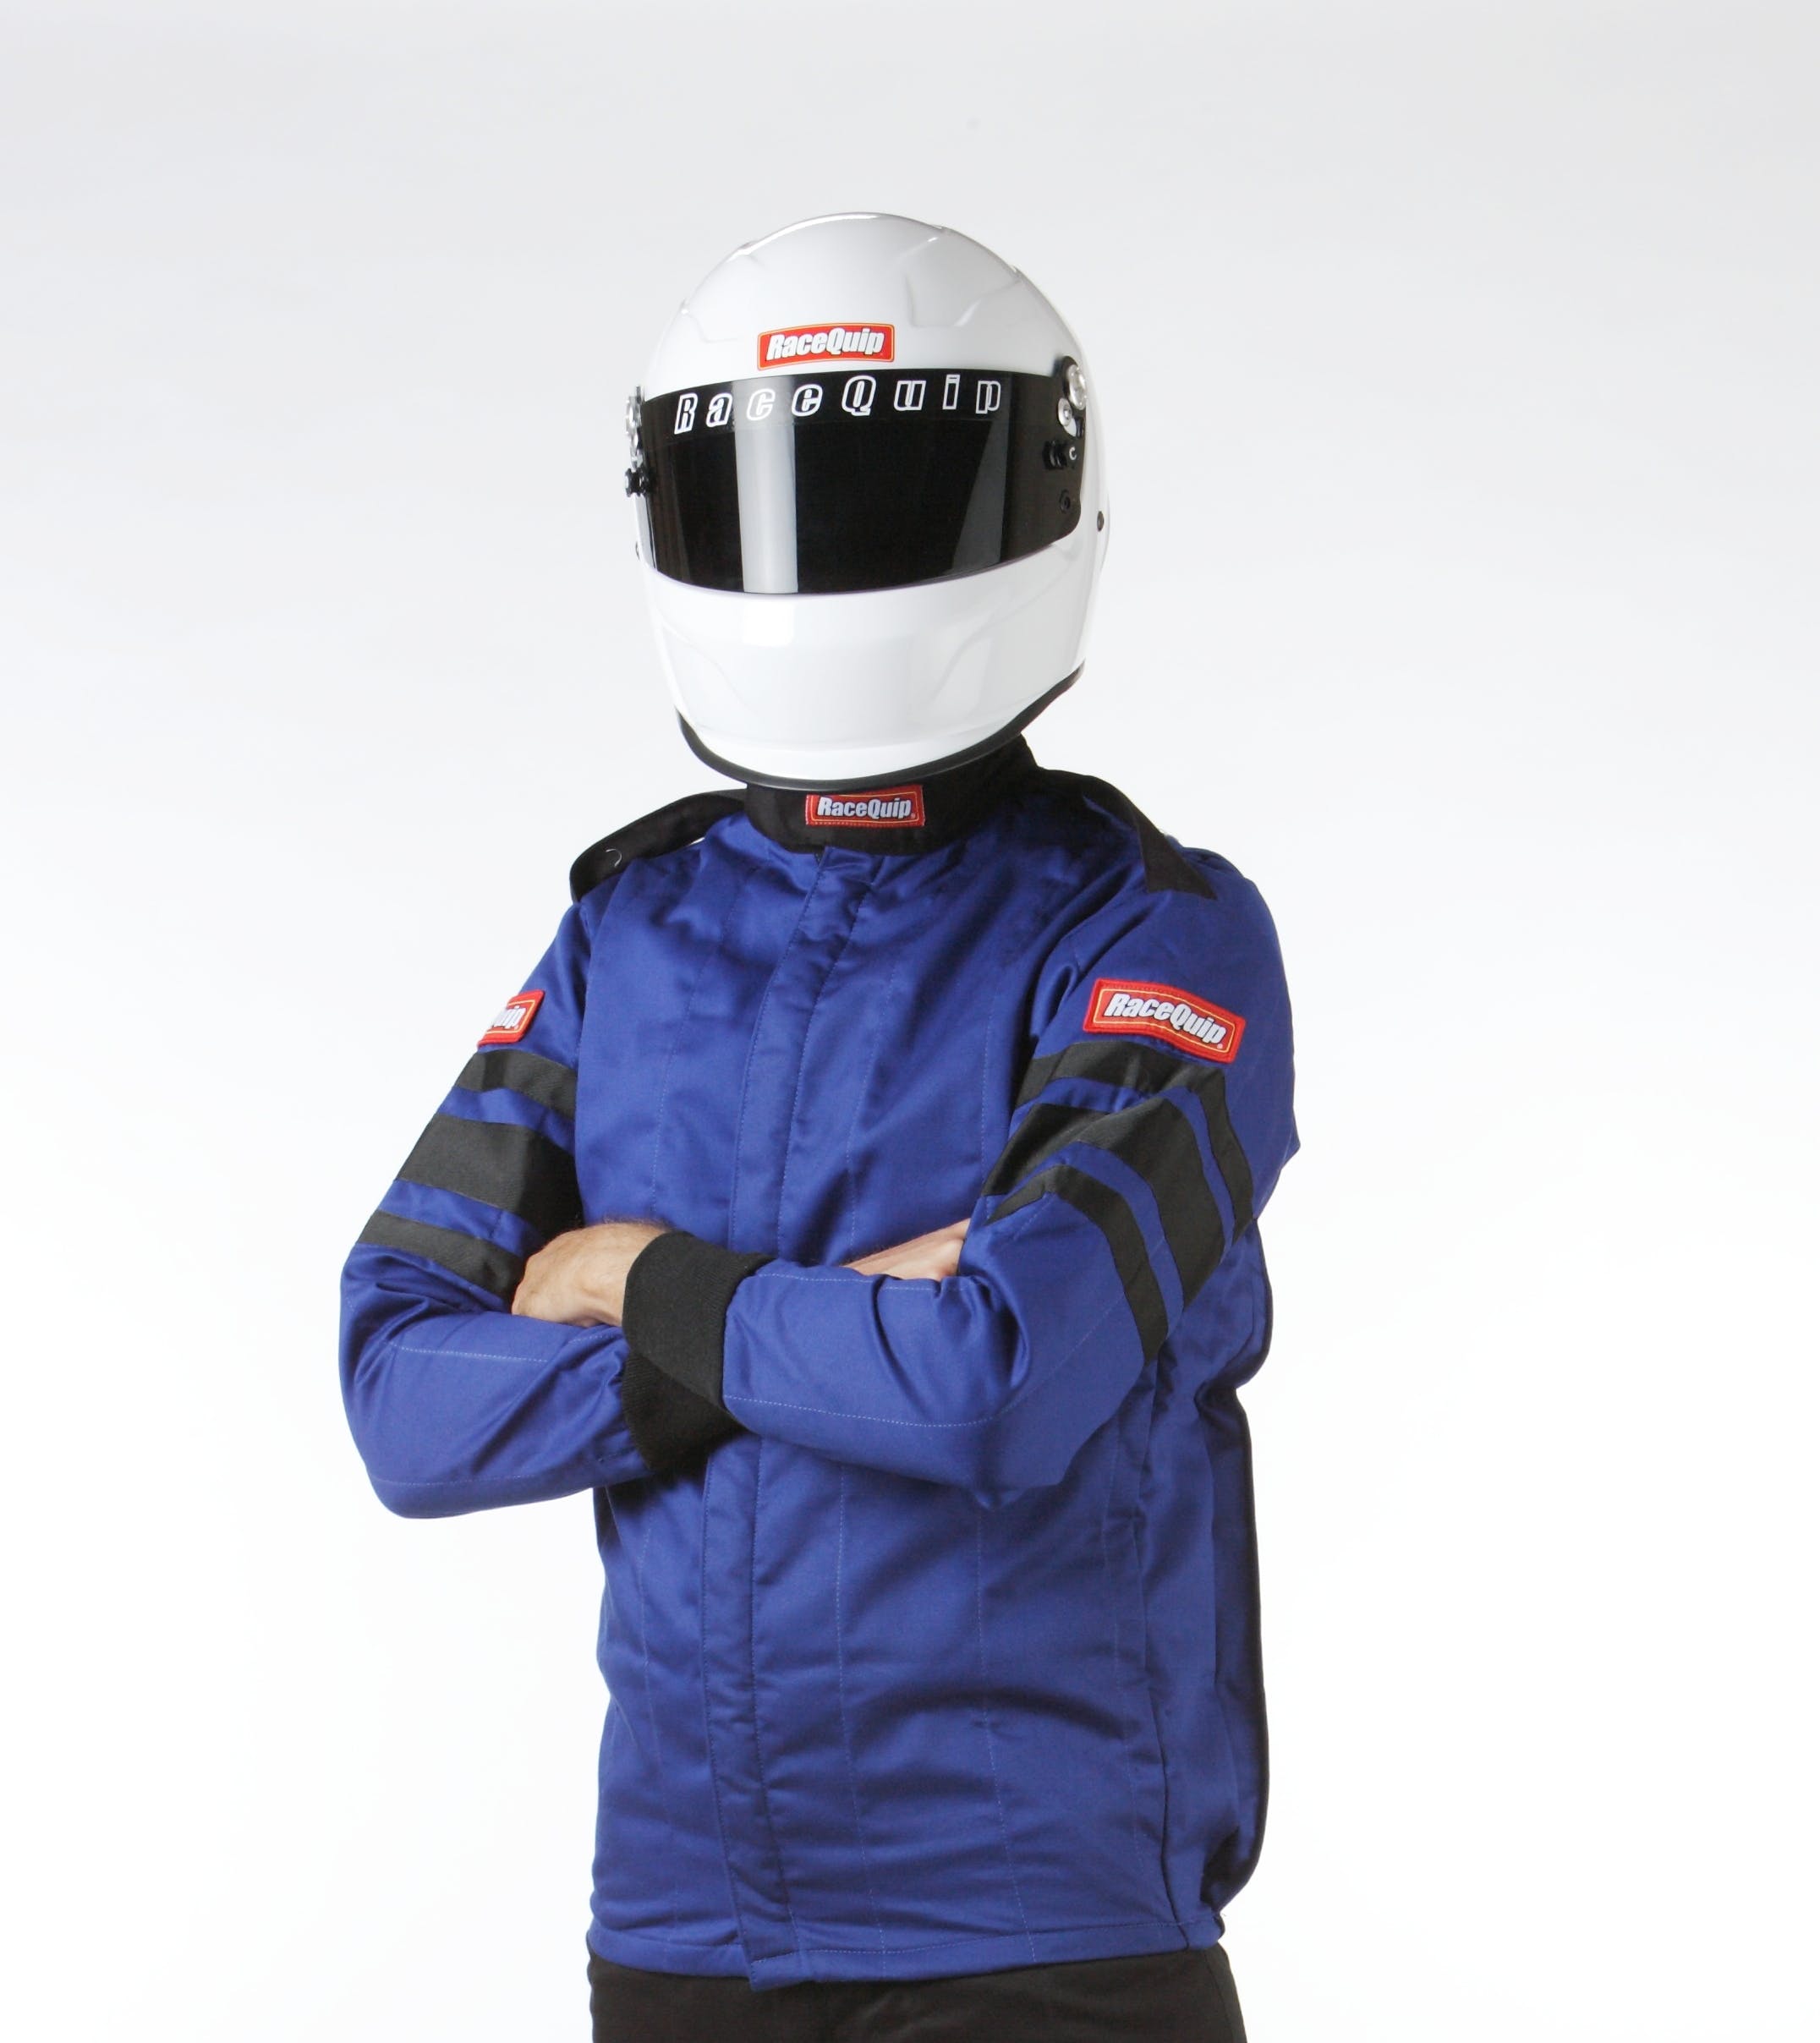 RaceQuip 121025 SFI-5 Pyrovatex Multi-Layer Racing Fire Jacket (Blue, Large)